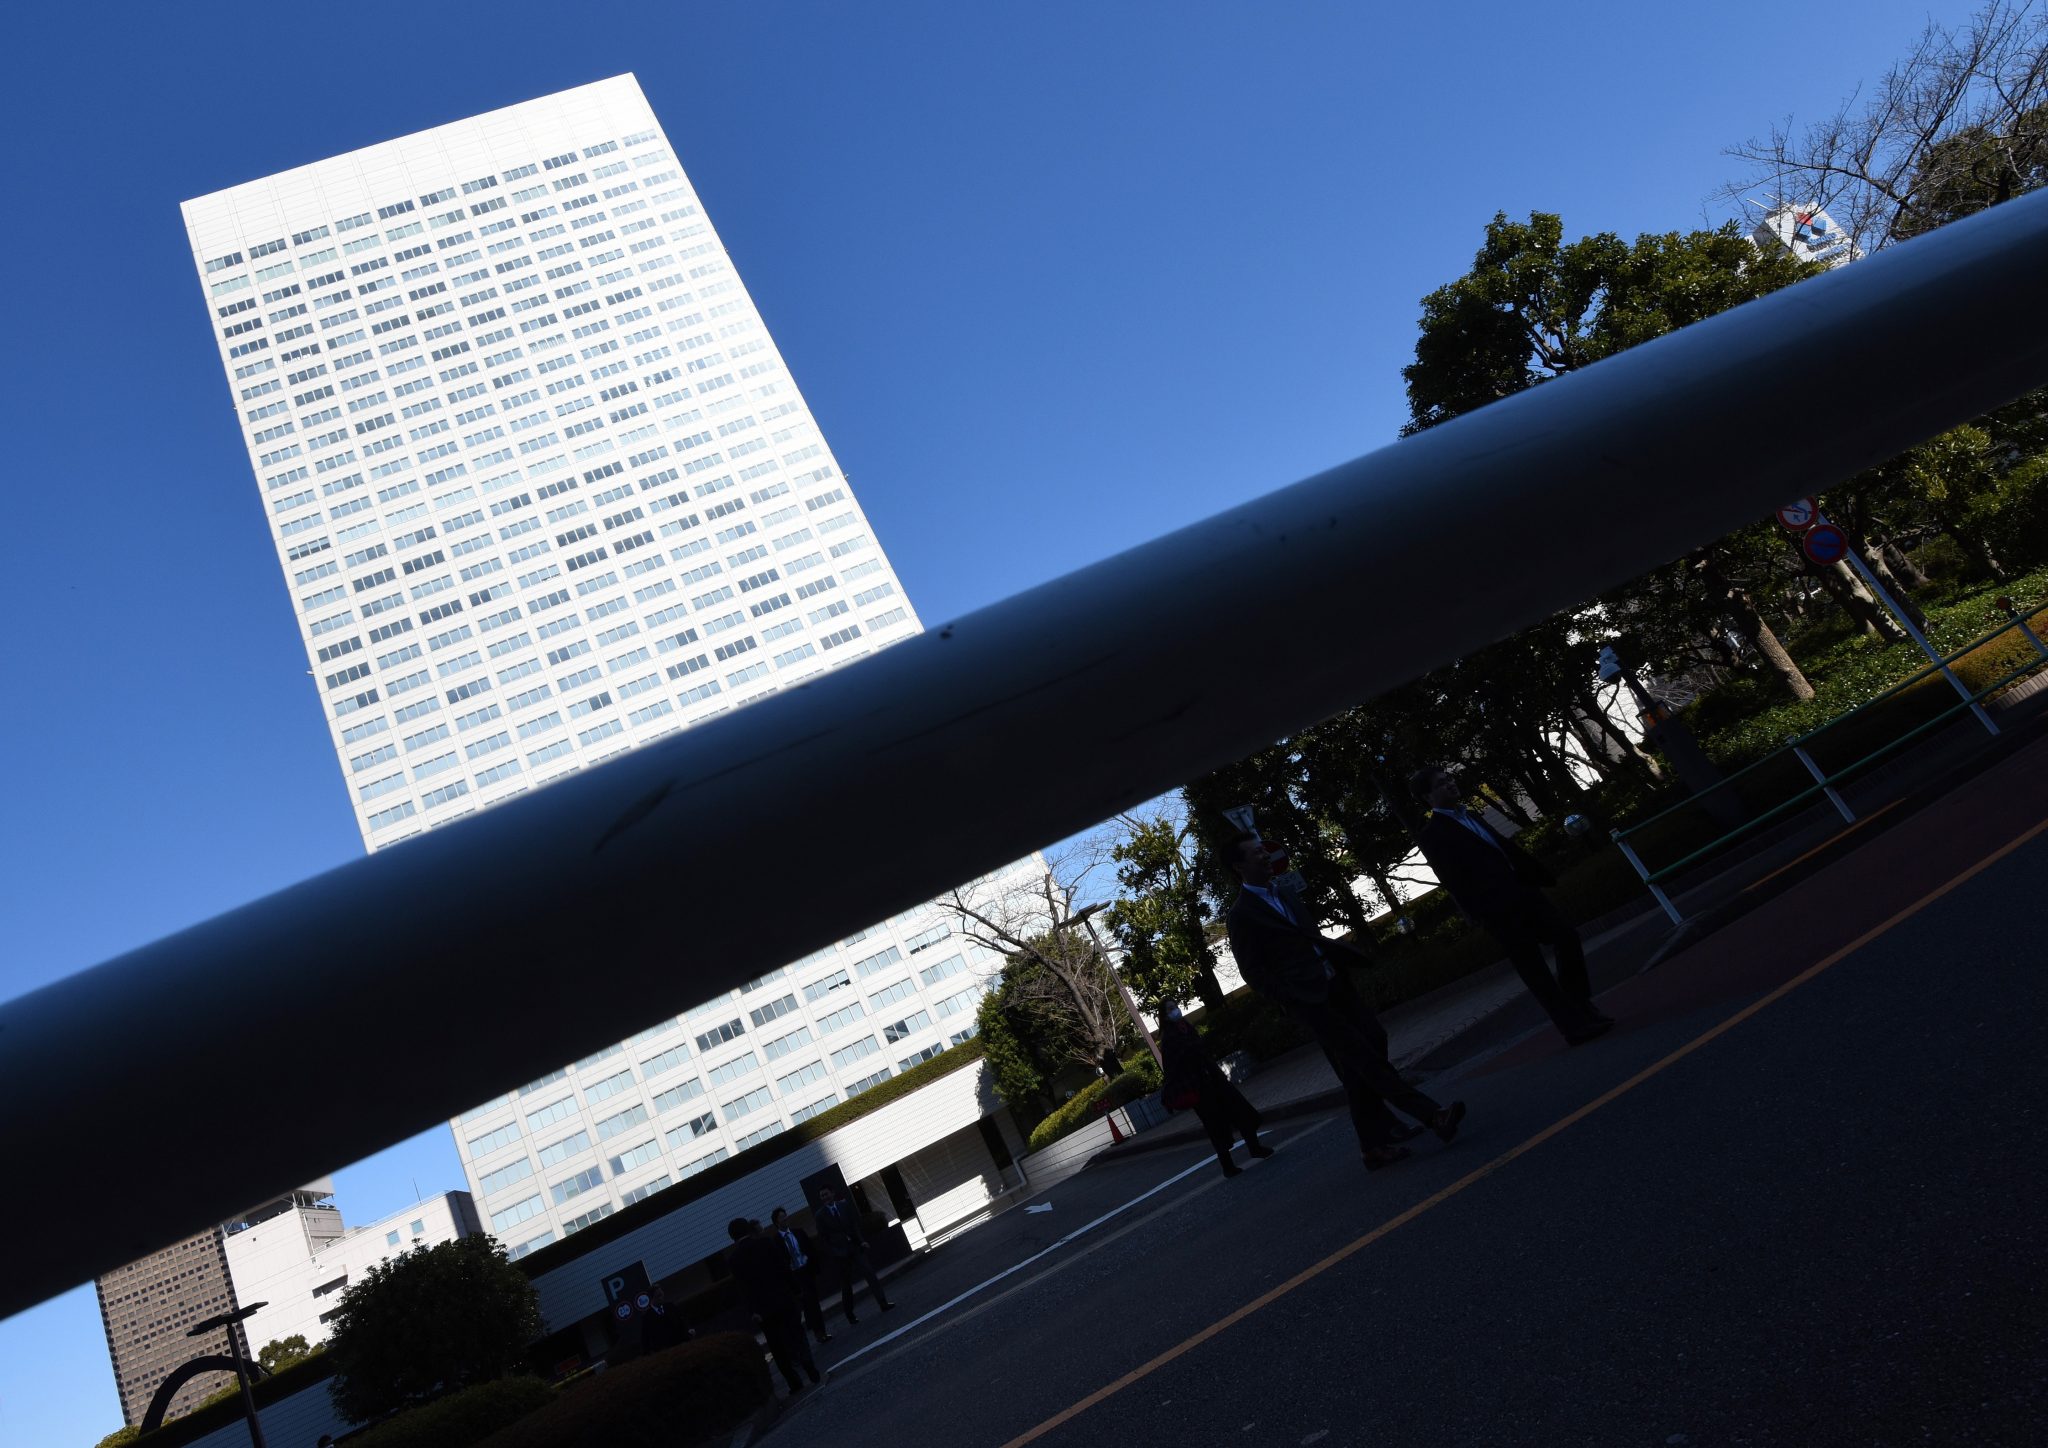 People walk past the headquarters of Japan's Toshiba in Tokyo on February 14, 2017.  Toshiba shares dived more than nine percent on February 14 after it surprised markets by delaying the release of financial results that were expected to include billions of dollars in losses tied to its US nuclear power unit. / AFP PHOTO / Toru YAMANAKA